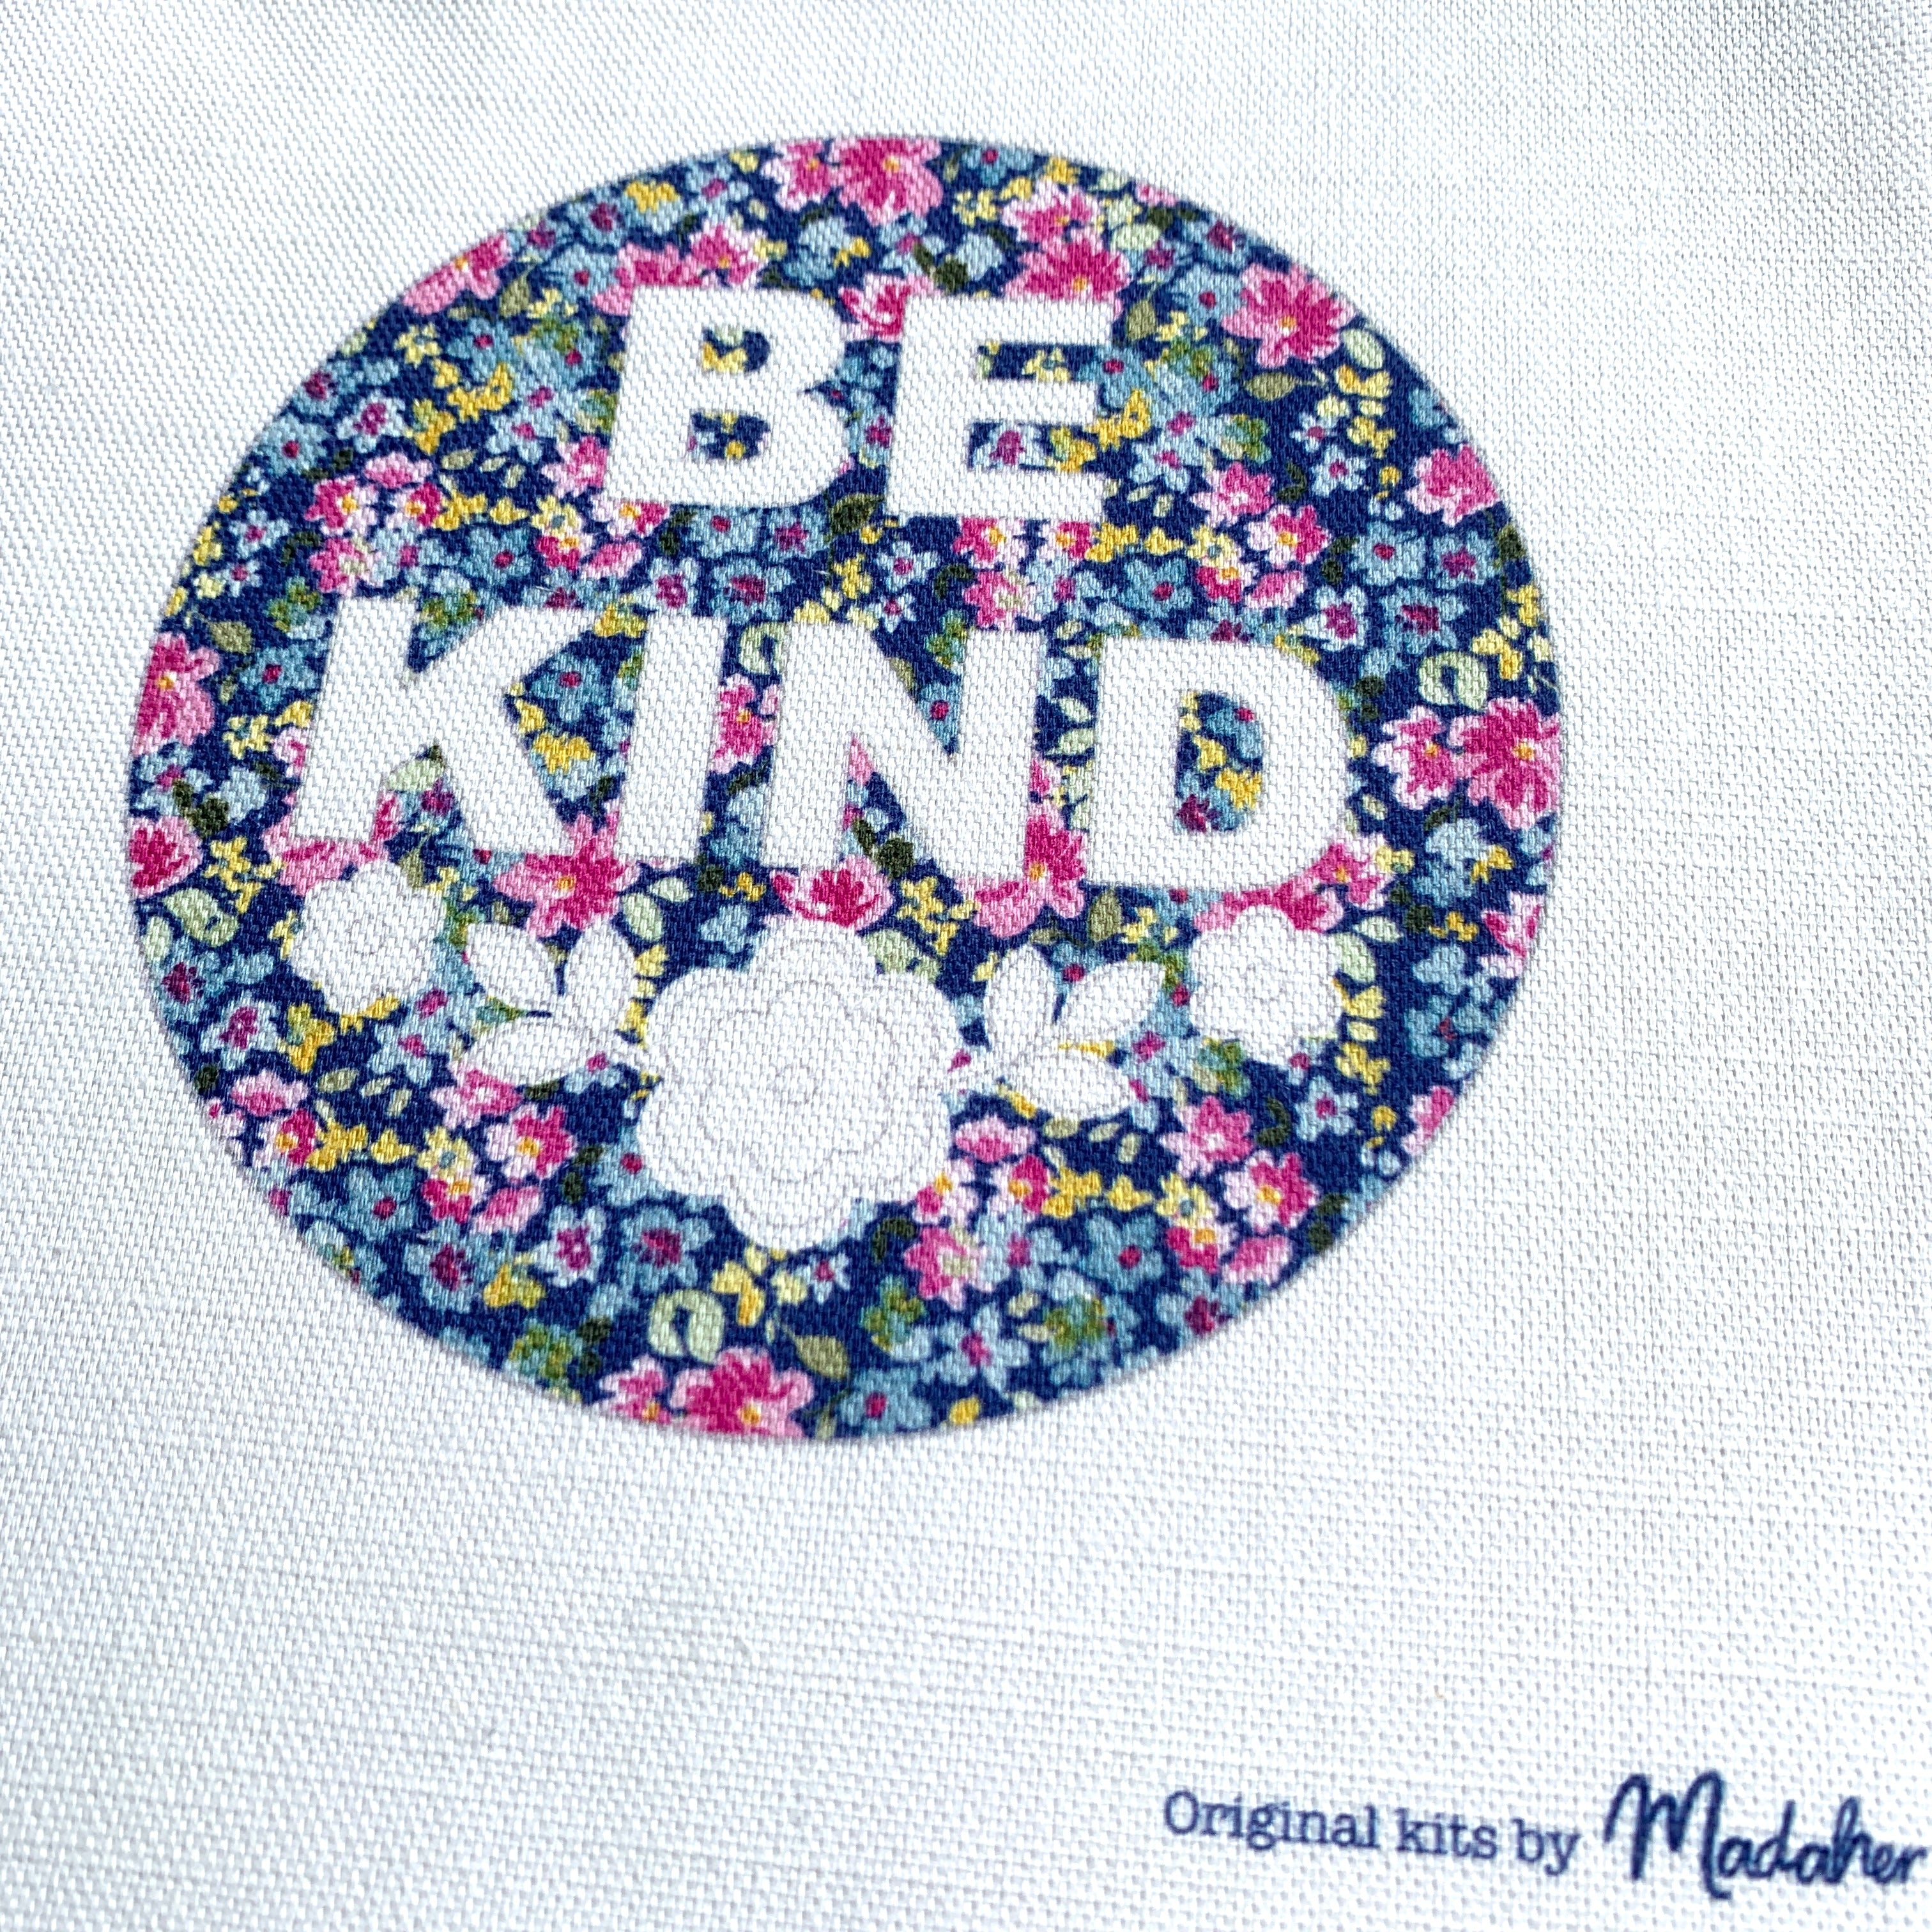 Positive Words 'Be Kind' Embroidery Panel.